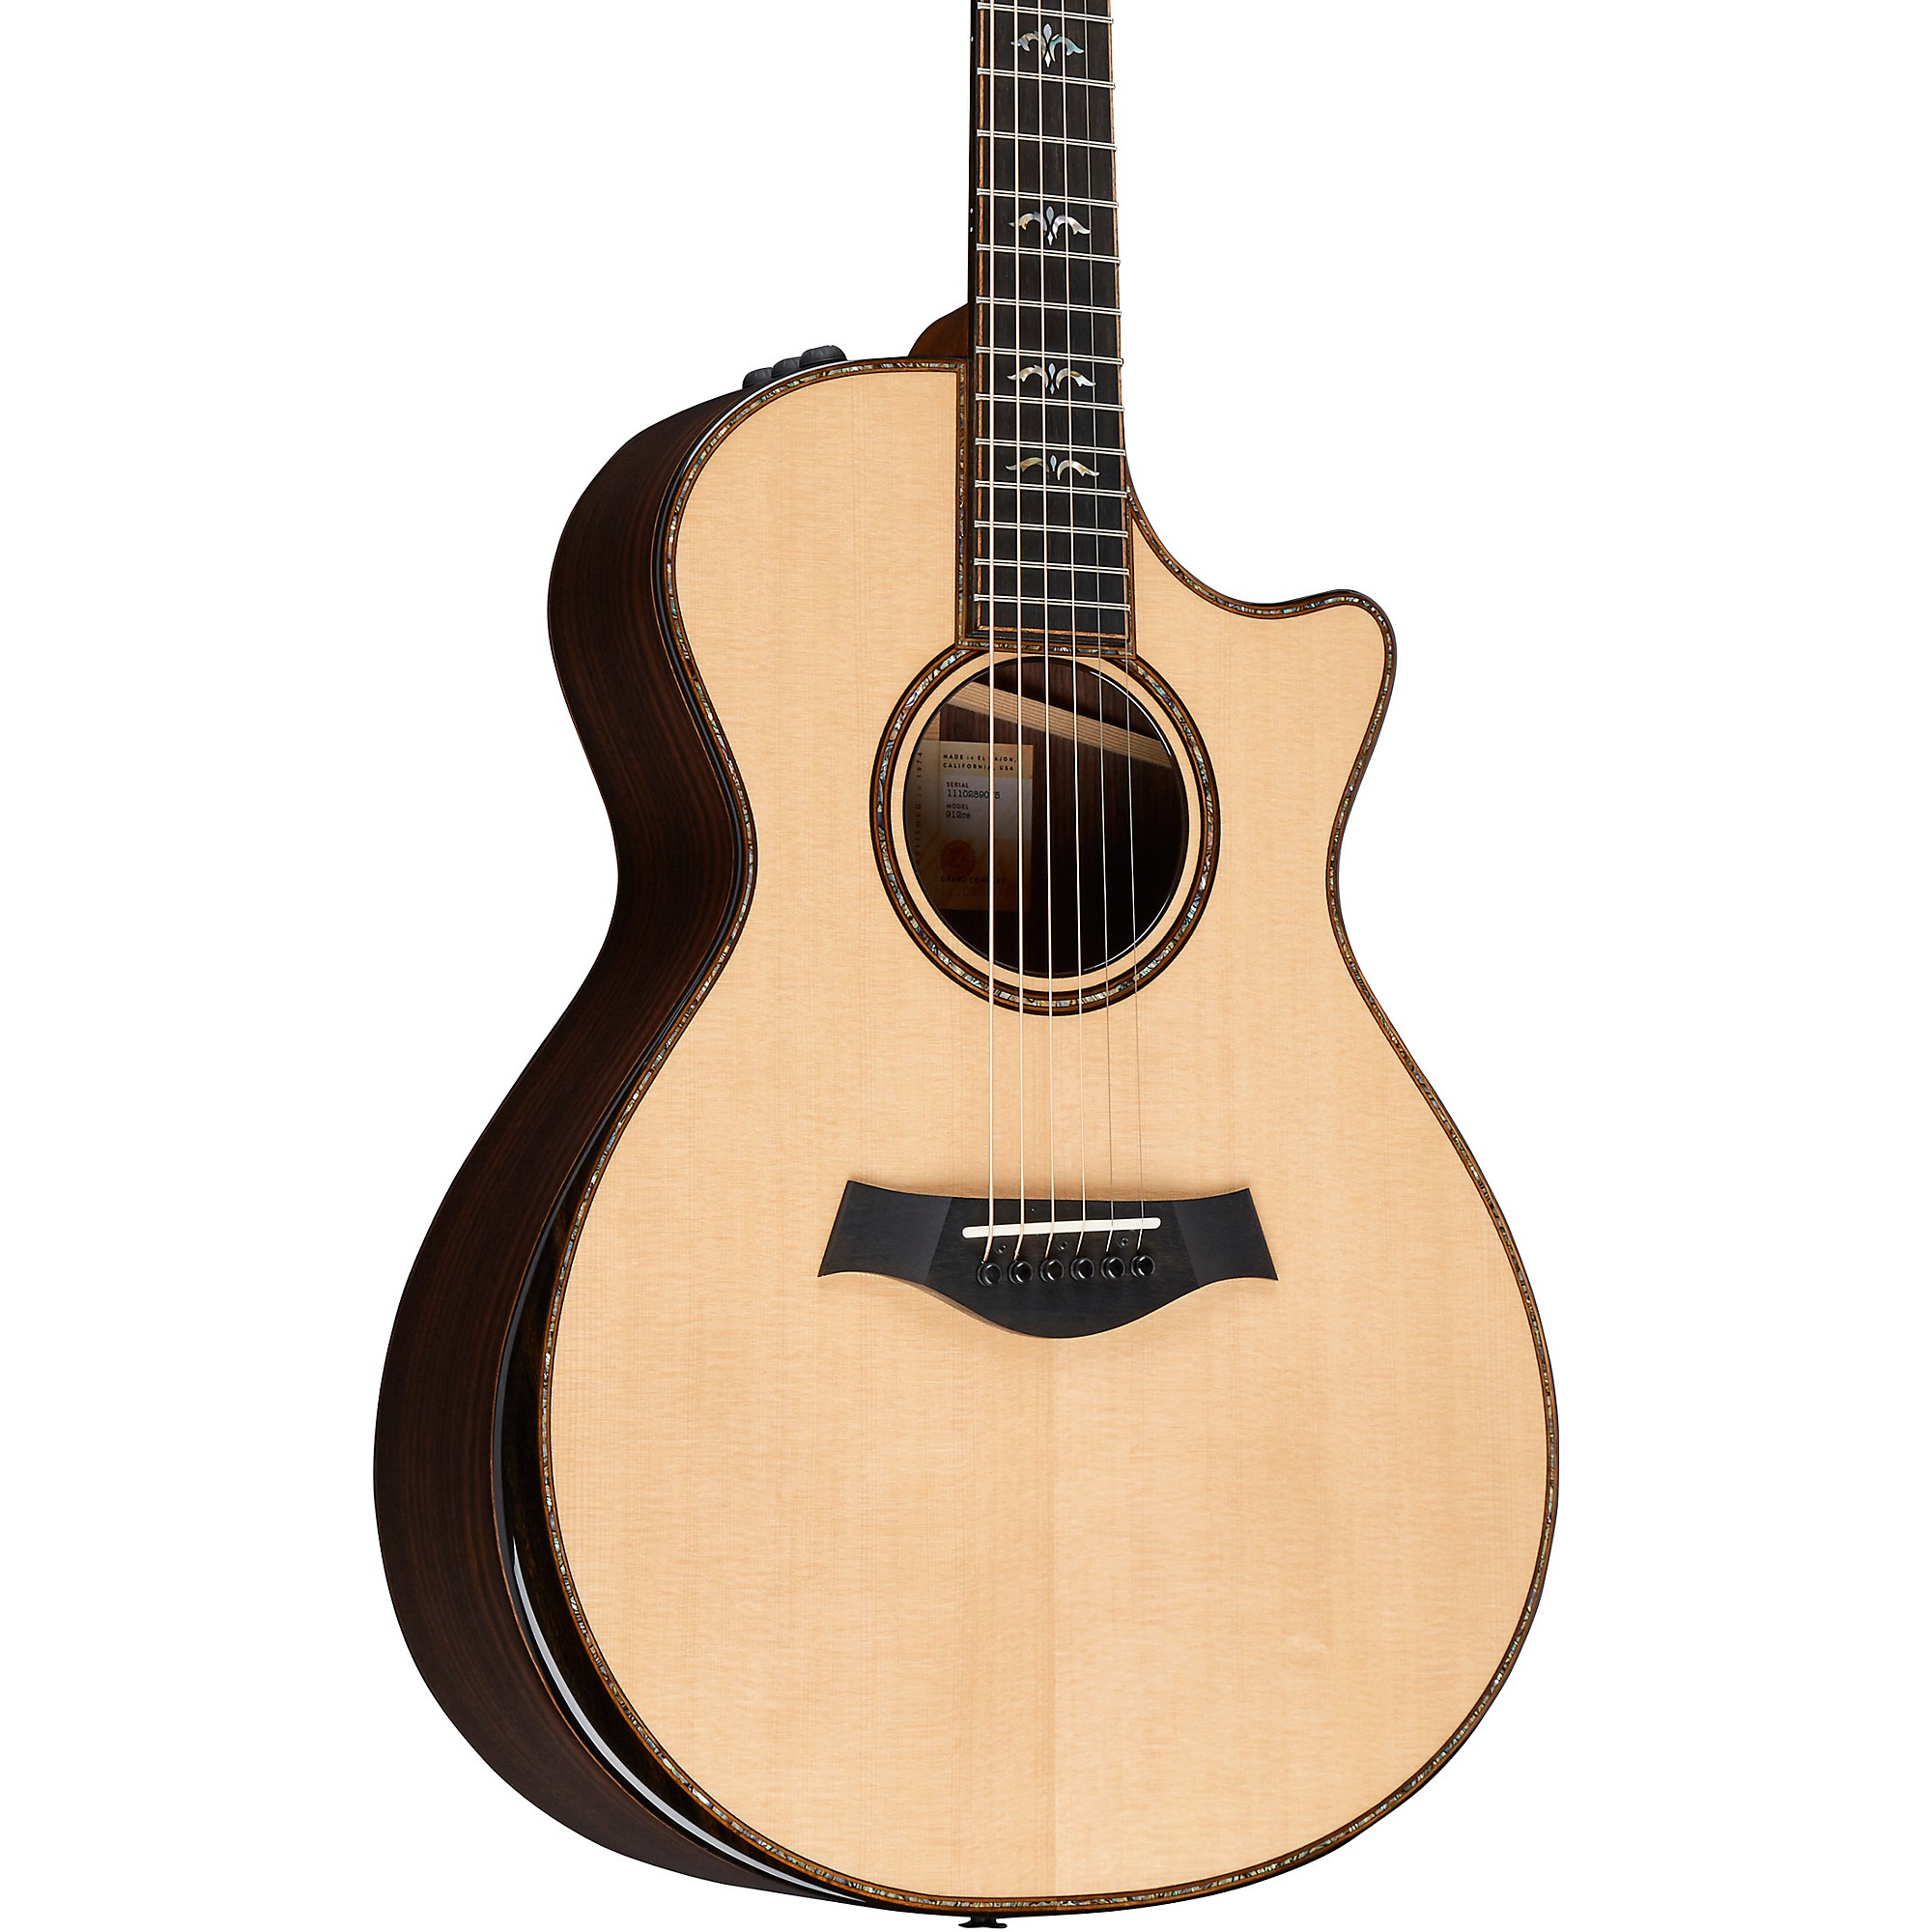 Lookup taylor guitars serial number How To